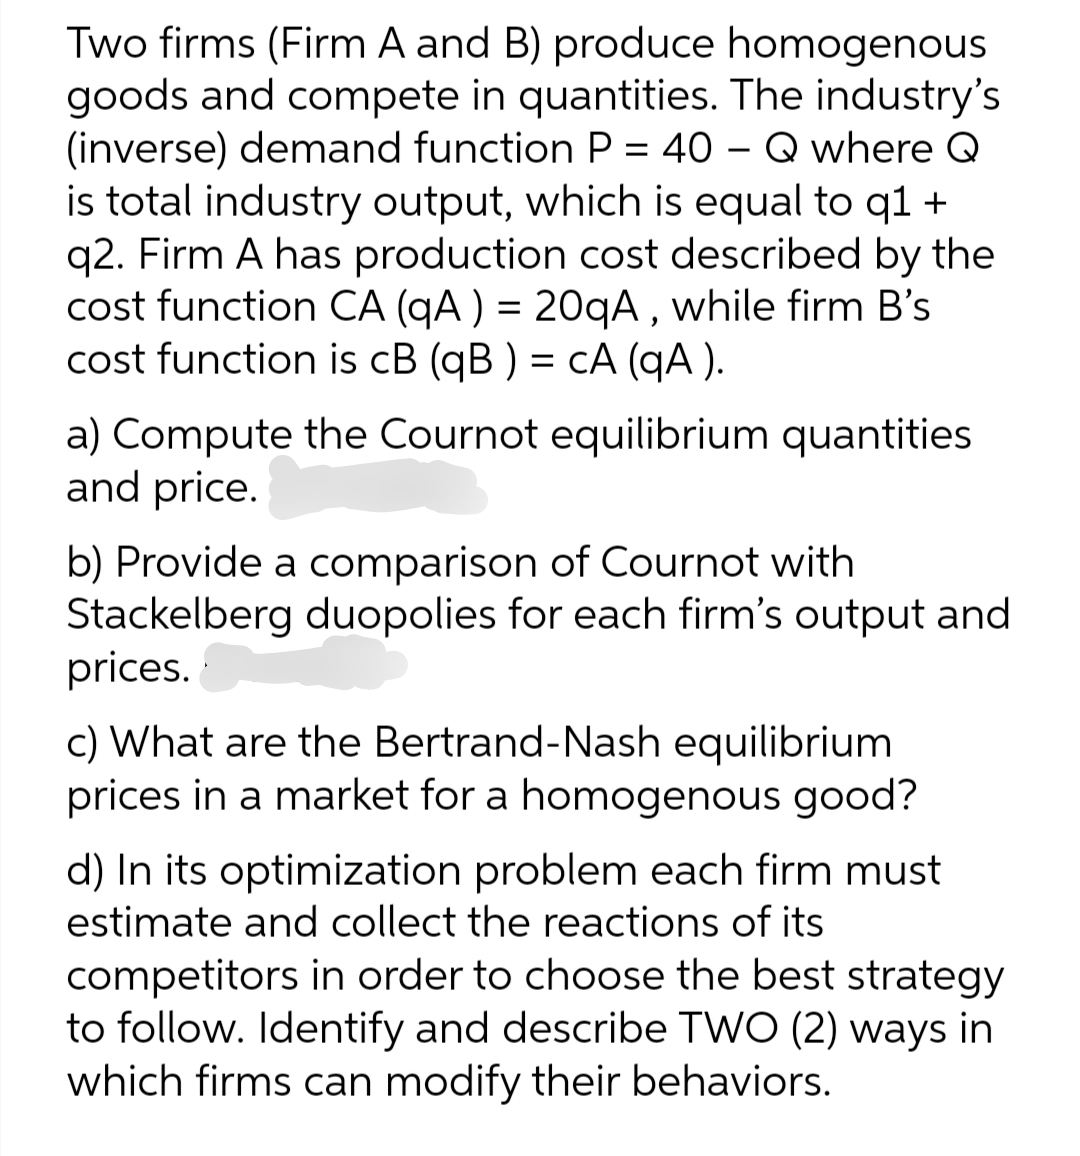 Two firms (Firm A and B) produce homogenous
goods and compete in quantities. The industry's
(inverse) demand function P = 40 – Q where Q
is total industry output, which is equal to q1 +
q2. Firm A has production cost described by the
cost function CA (gA ) = 20gA , while firm B's
cost function is cB (qB ) = cA (qA ).
%3|
%3D
a) Compute the Cournot equilibrium quantities
and price.
b) Provide a comparison of Cournot with
Stackelberg duopolies for each firm's output and
prices.
c) What are the Bertrand-Nash equilibrium
prices in a market for a homogenous good?
d) In its optimization problem each firm must
estimate and collect the reactions of its
competitors in order to choose the best strategy
to follow. Identify and describe TWO (2) ways in
which firms can modify their behaviors.
